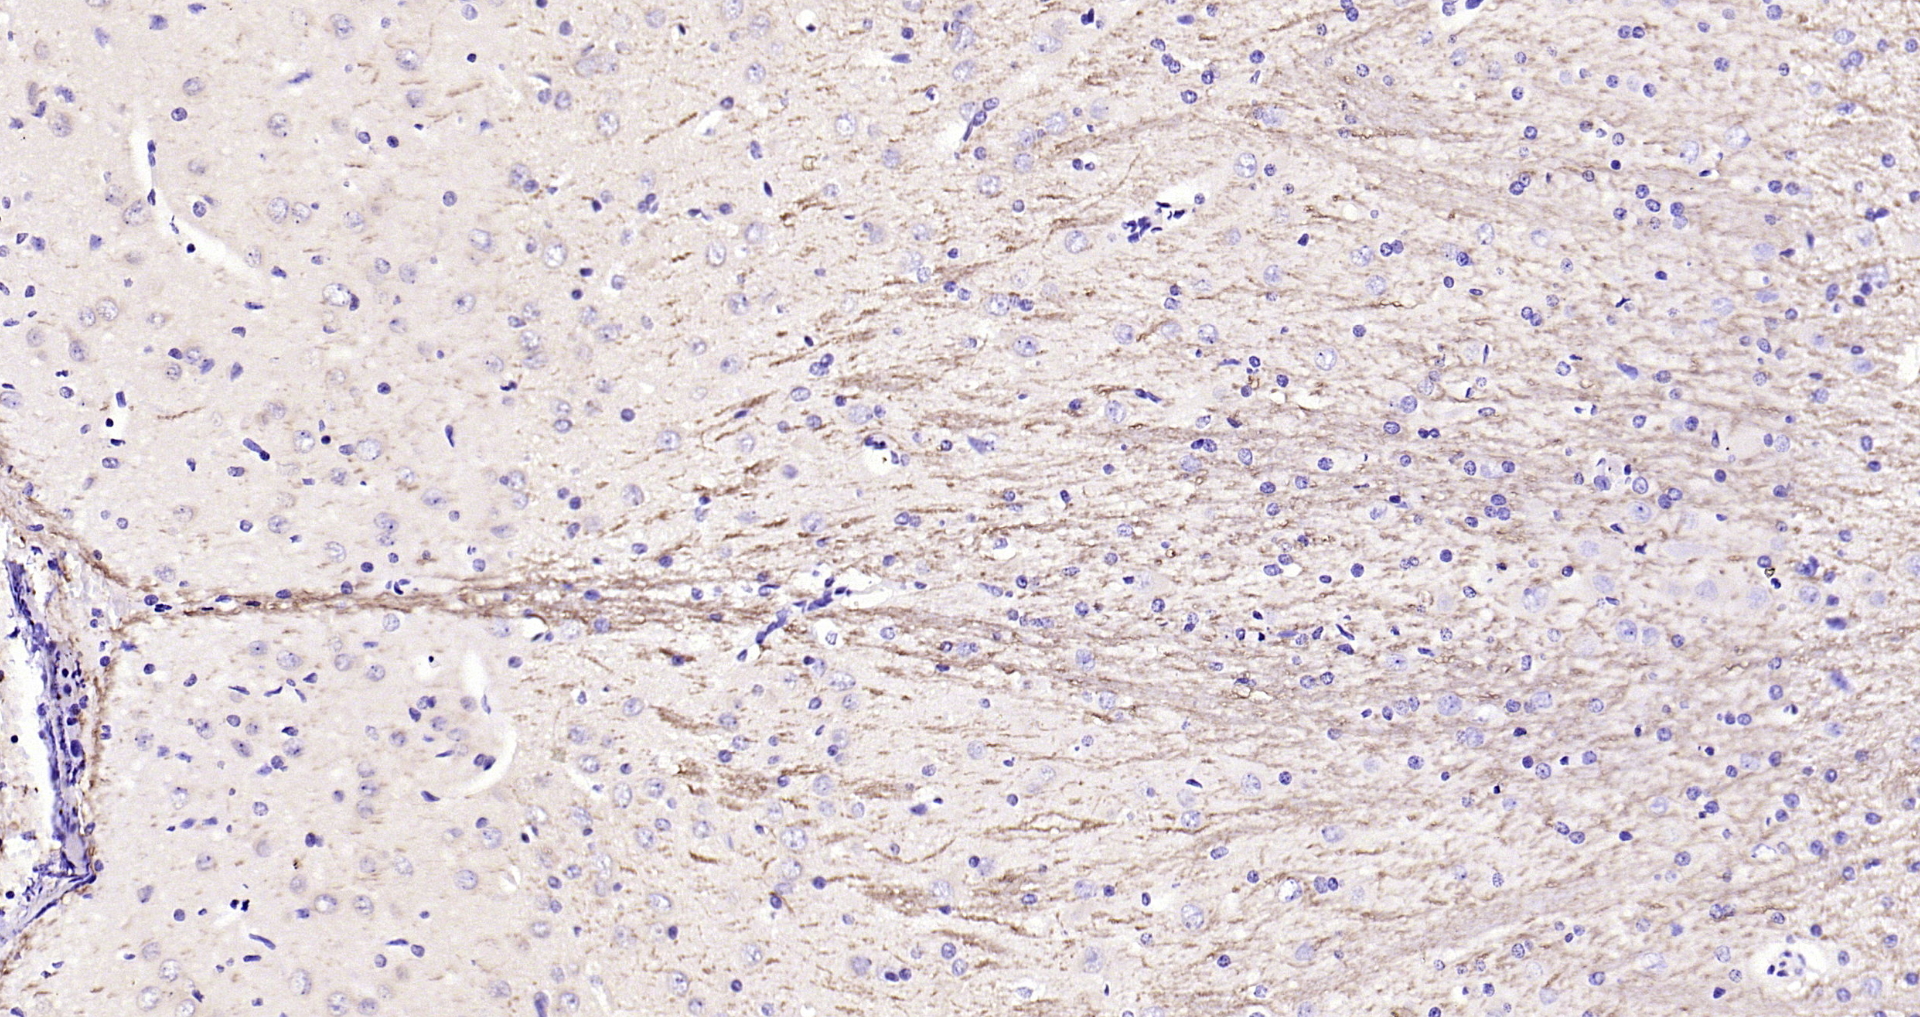 Paraformaldehyde-fixed, paraffin embedded Rat brain; Antigen retrieval by boiling in sodium citrate buffer (pH6.0) for 15min; Block endogenous peroxidase by 3% hydrogen peroxide for 20 minutes; Blocking buffer (normal goat serum) at 37°C for 30min; Antibody incubation with Notch1/MOTC Polyclonal Antibody, Unconjugated (bs-1335R) at 1:200 overnight at 4°C, DAB staining.